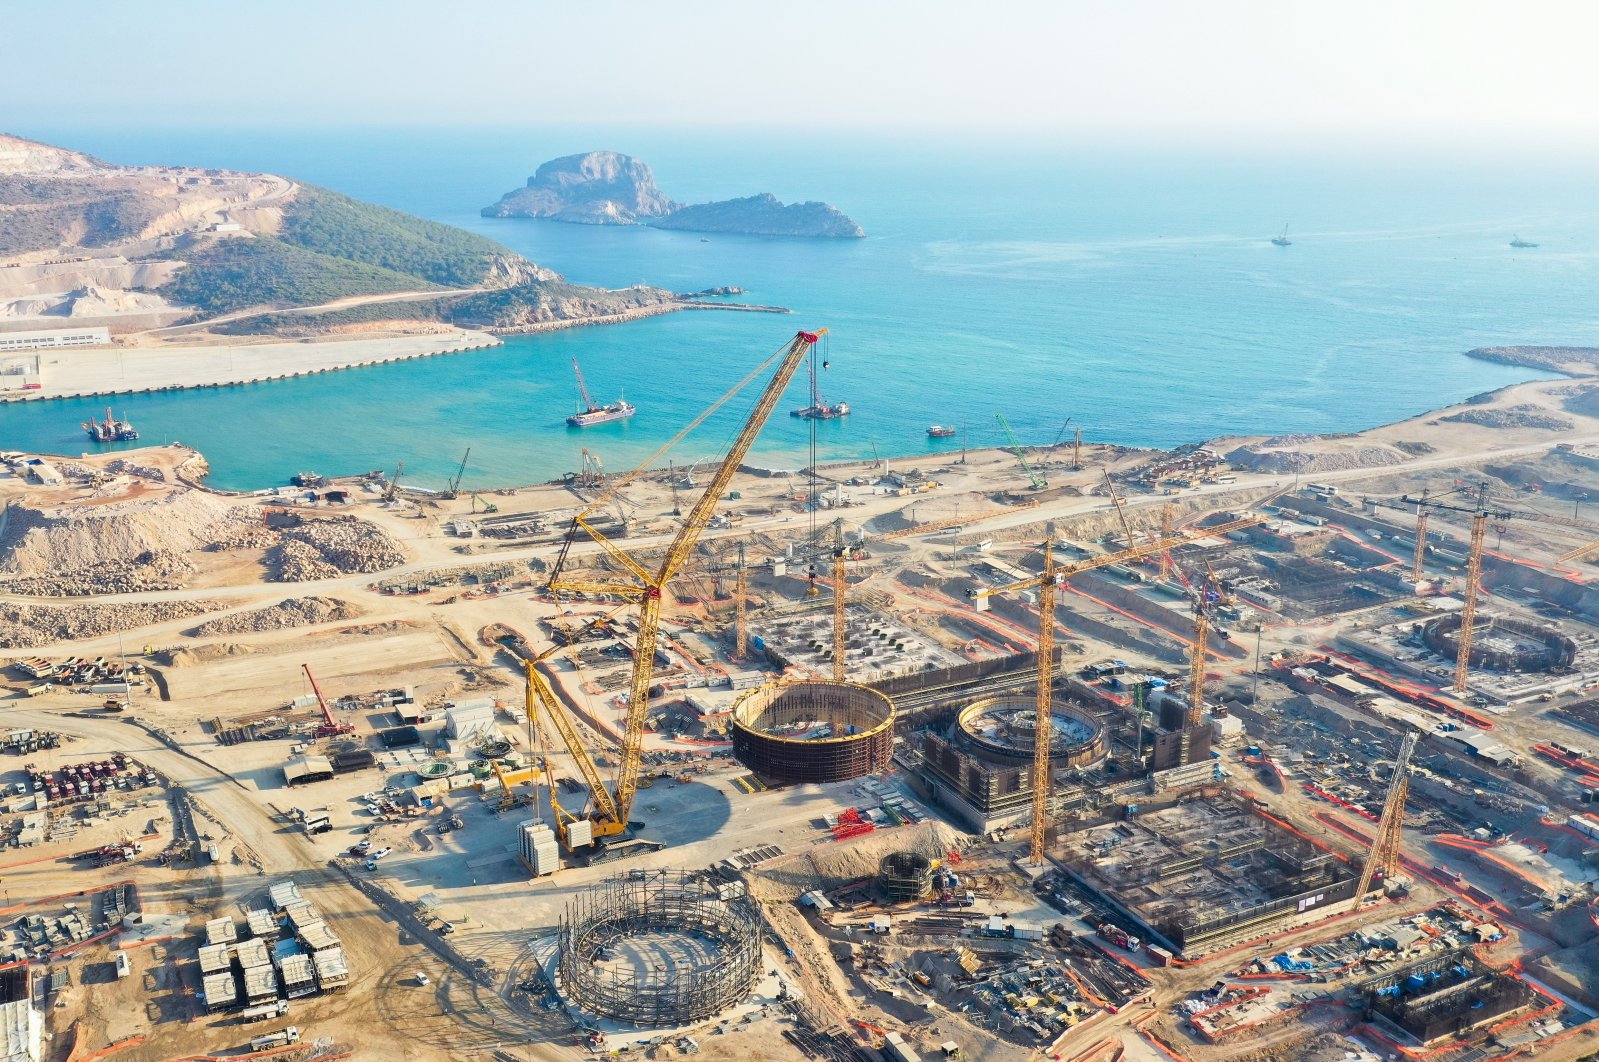 The construction site of the Akkuyu Nuclear Power Plant in southern Mersin province, Turkey, Jan. 26, 2021. (IHA Photo)